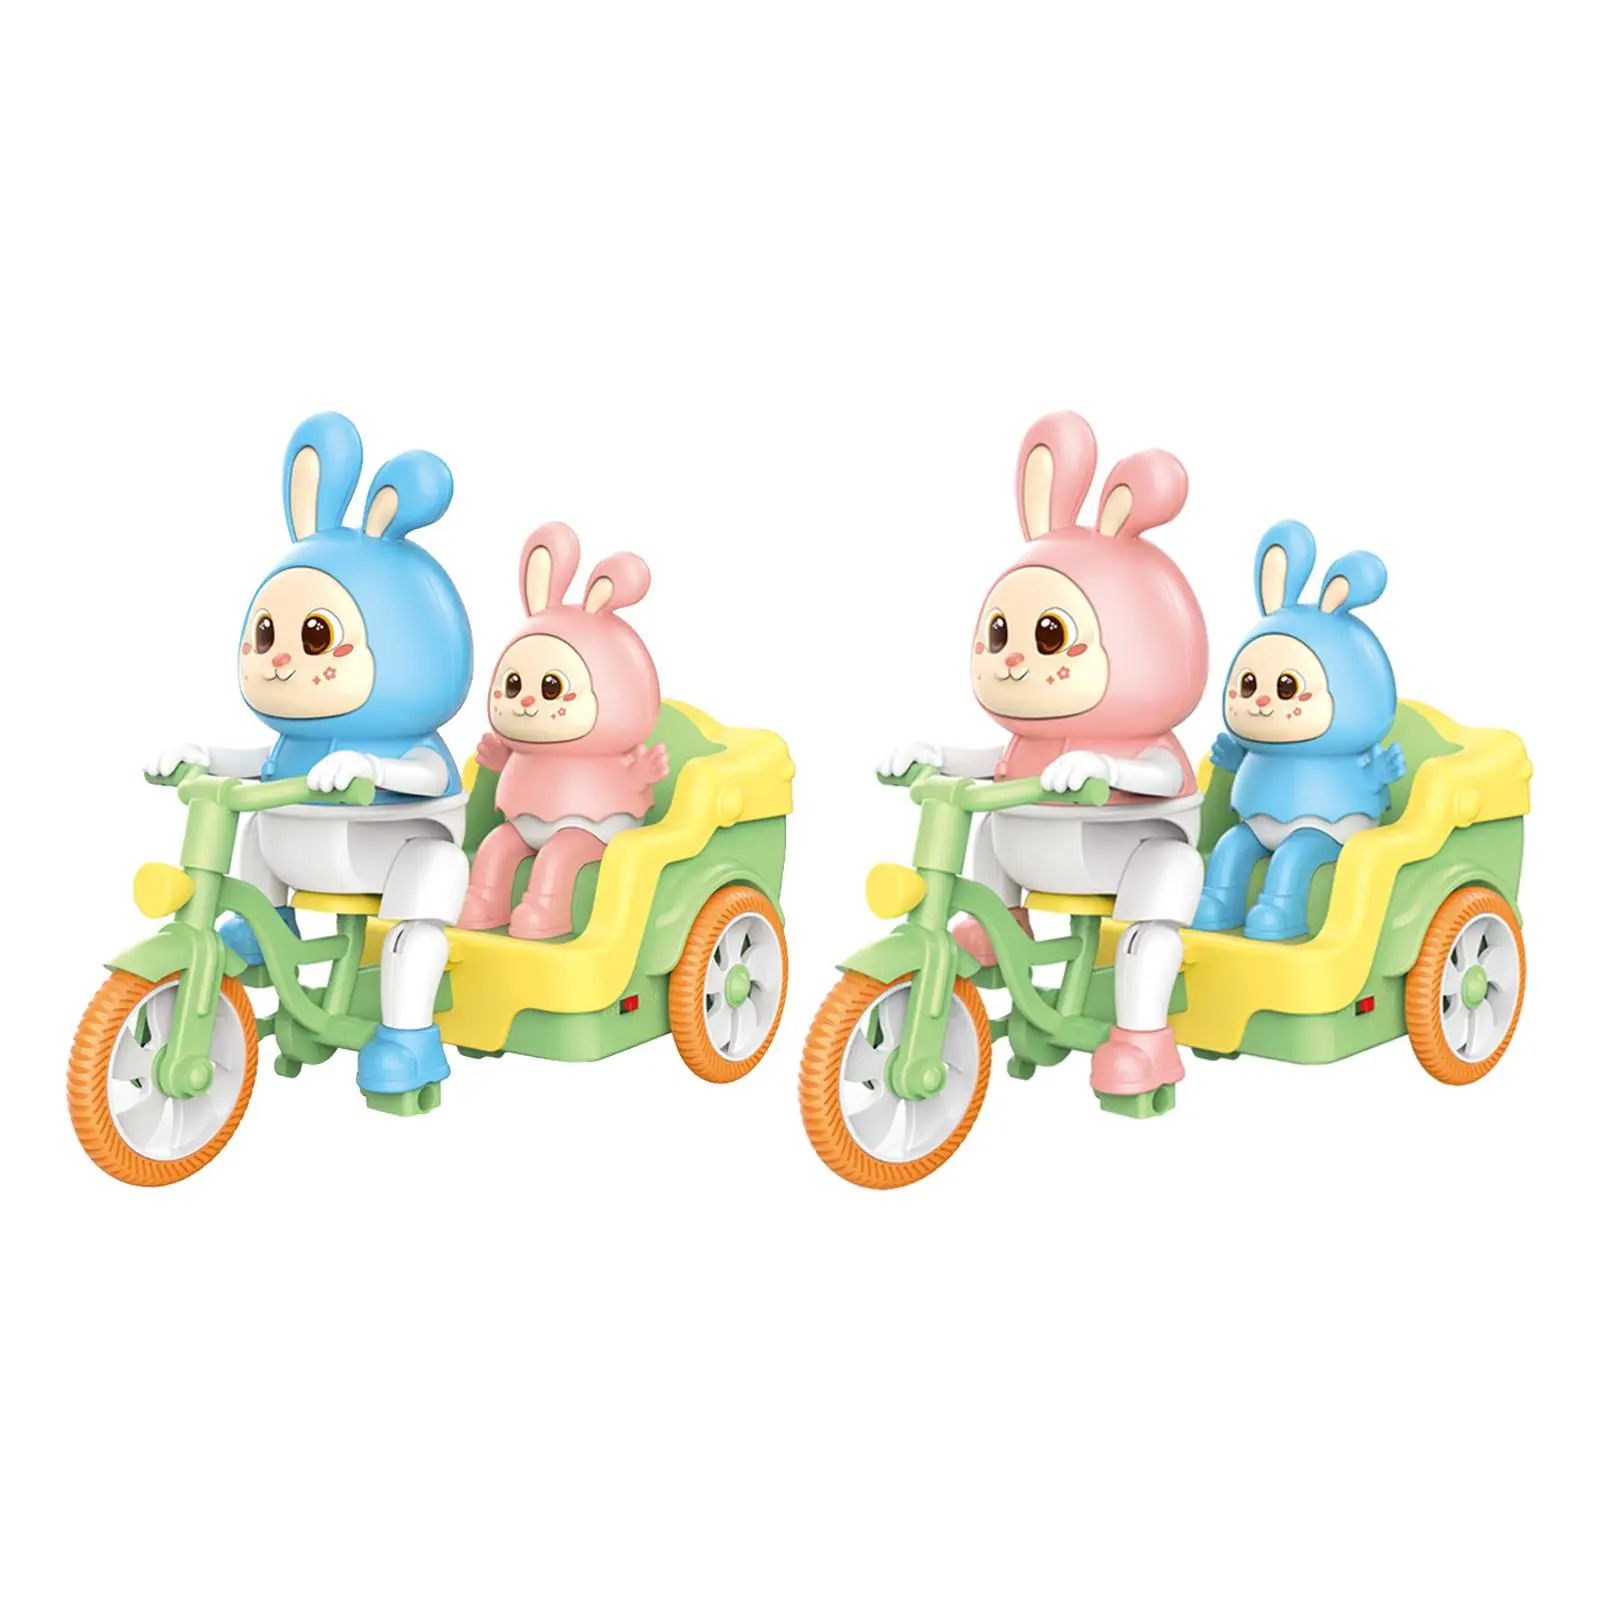 

Cute Rabbit Electric Tricycle Toy with Lights Music Bunny Riding Educational for Age 1 2 3 4 Preschool Children Kids Boys